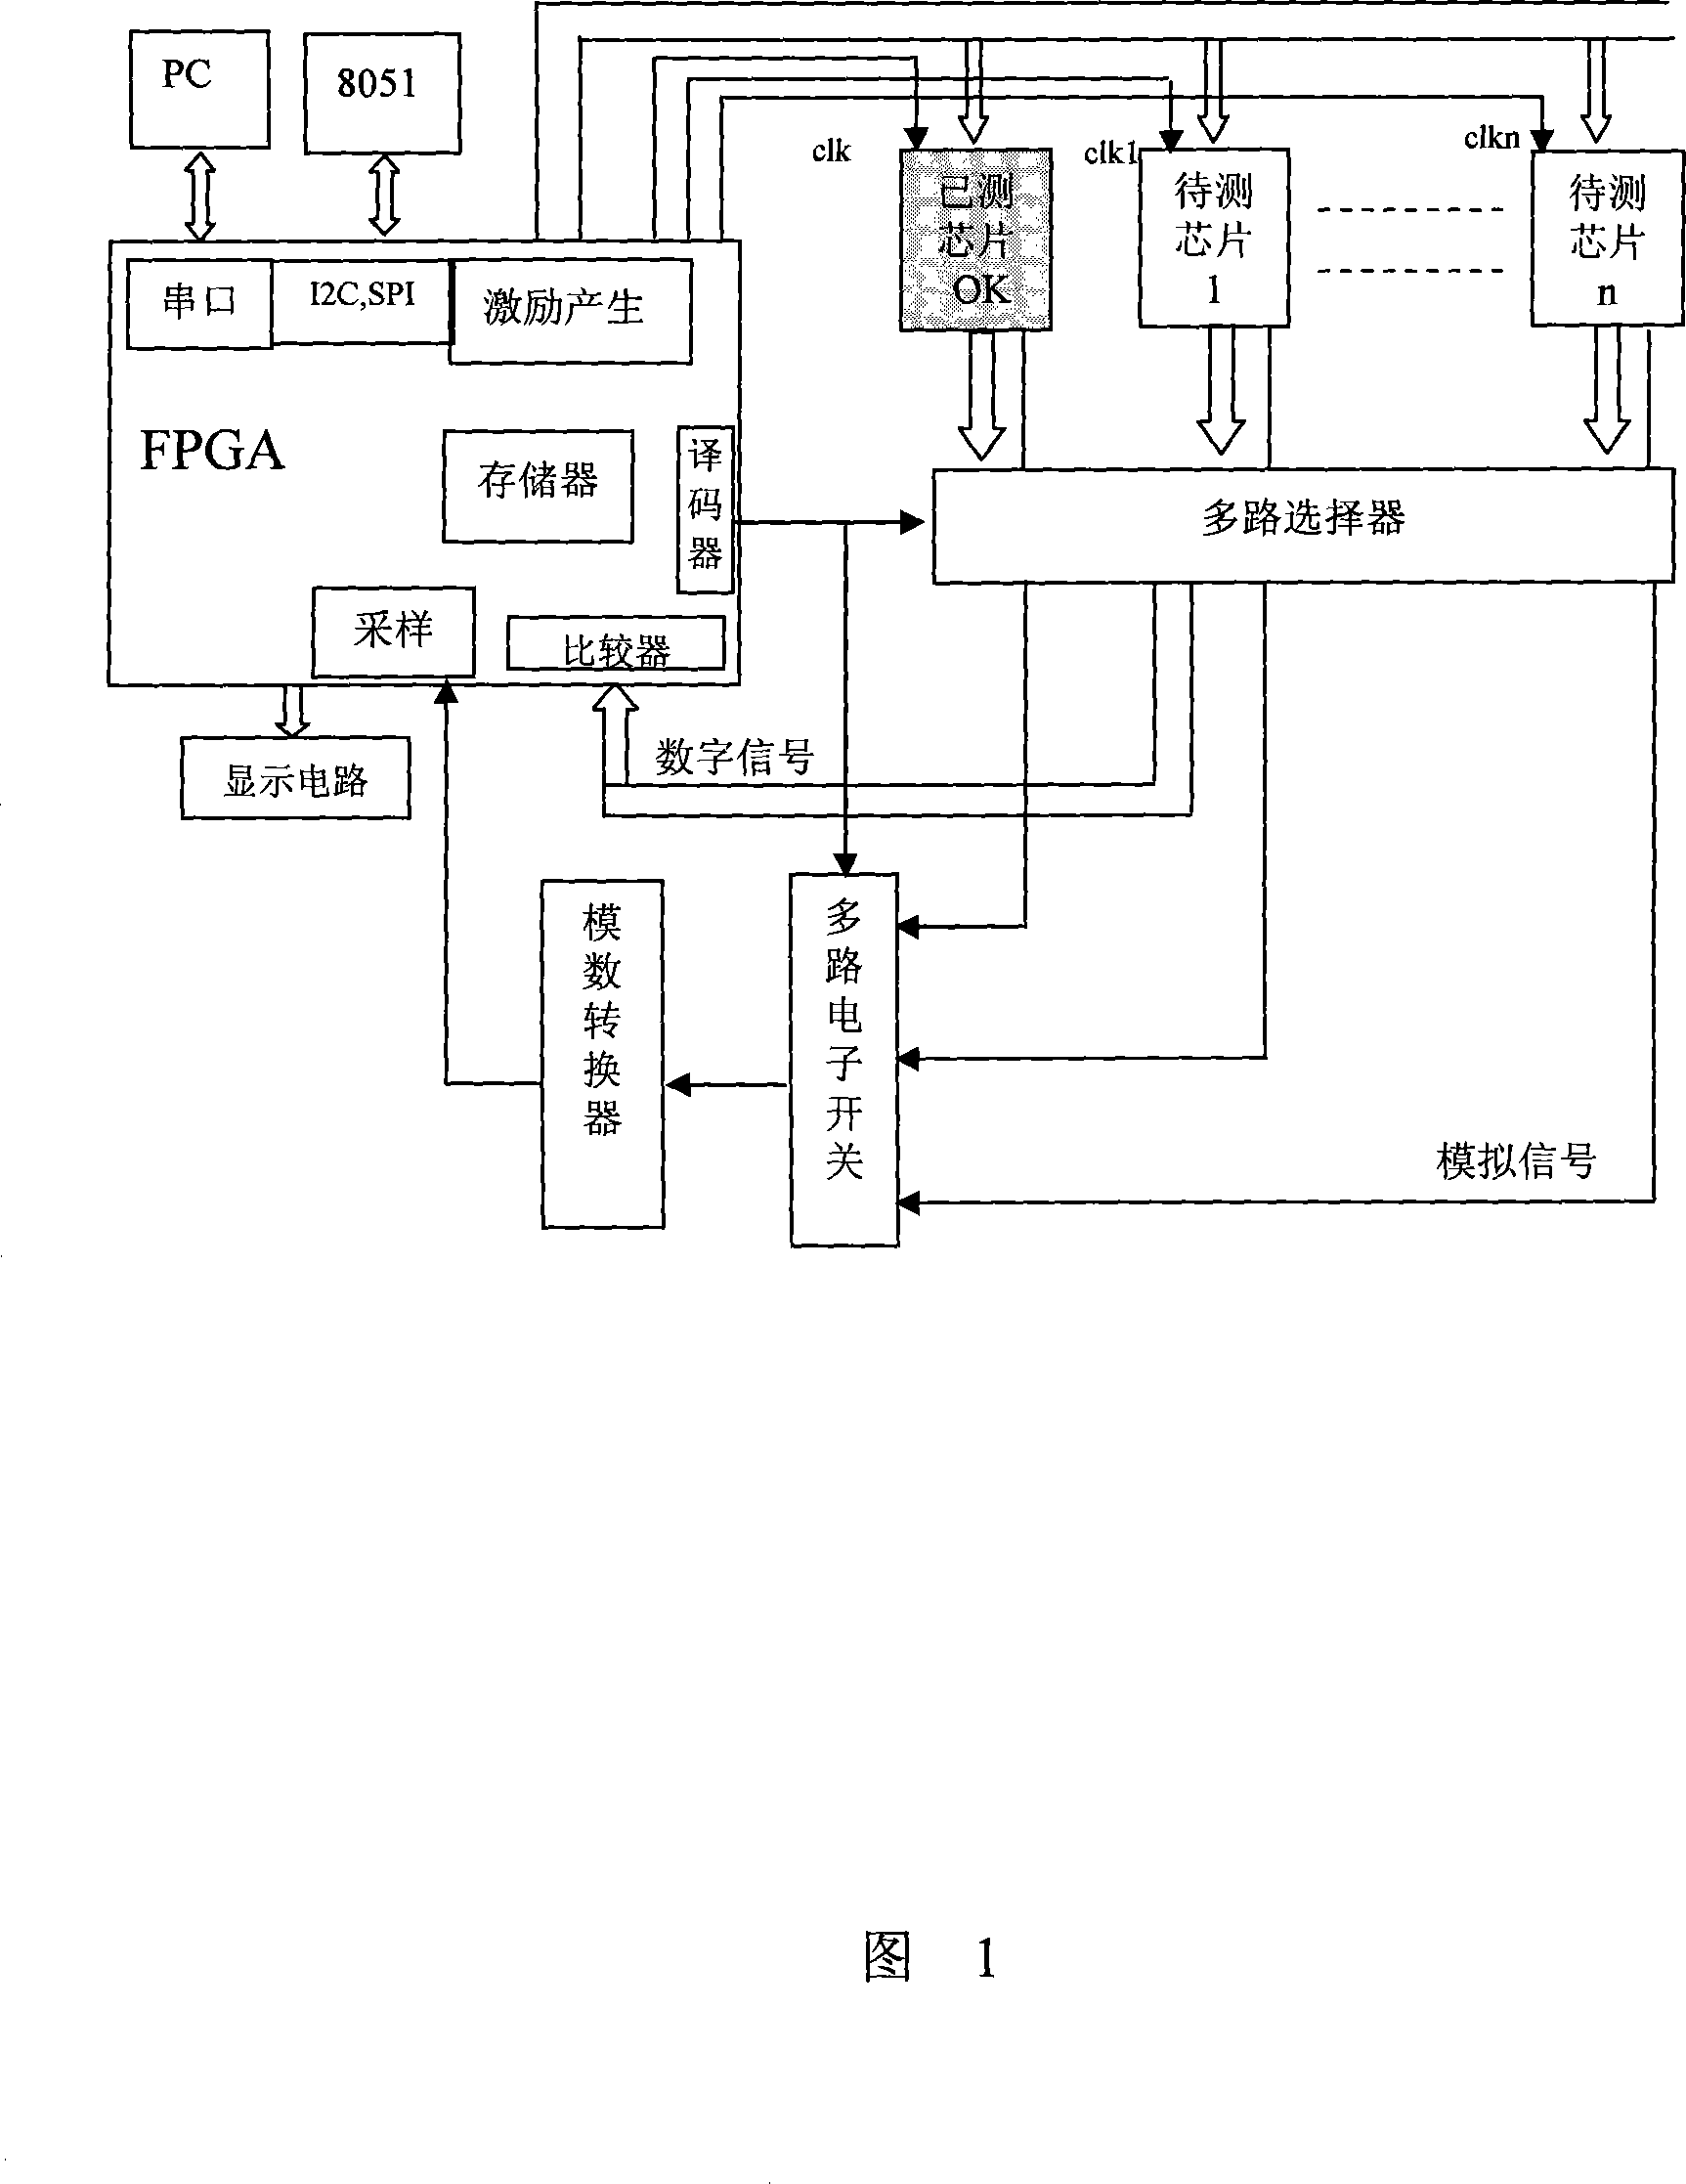 Multiple chips automatic test method based on programmable logic device